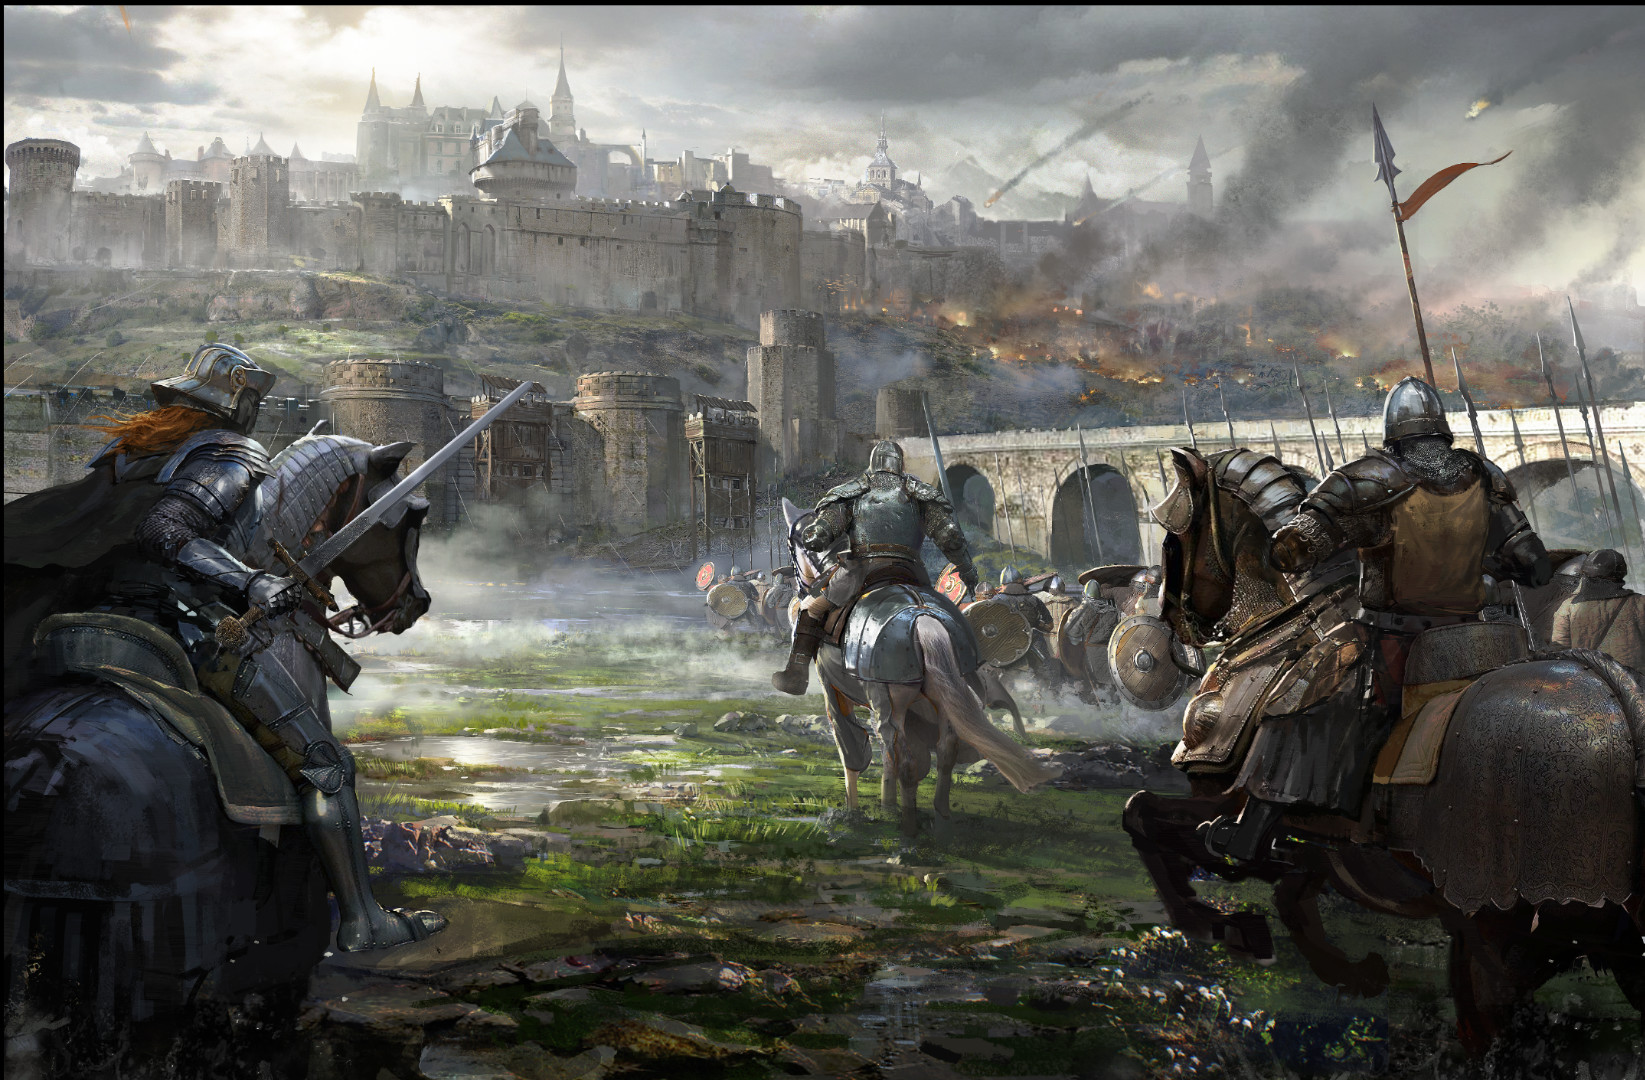 Fantasy Art Fantasy Castle Knight Horse Army Battle Assault Structures Wall 1645x1080